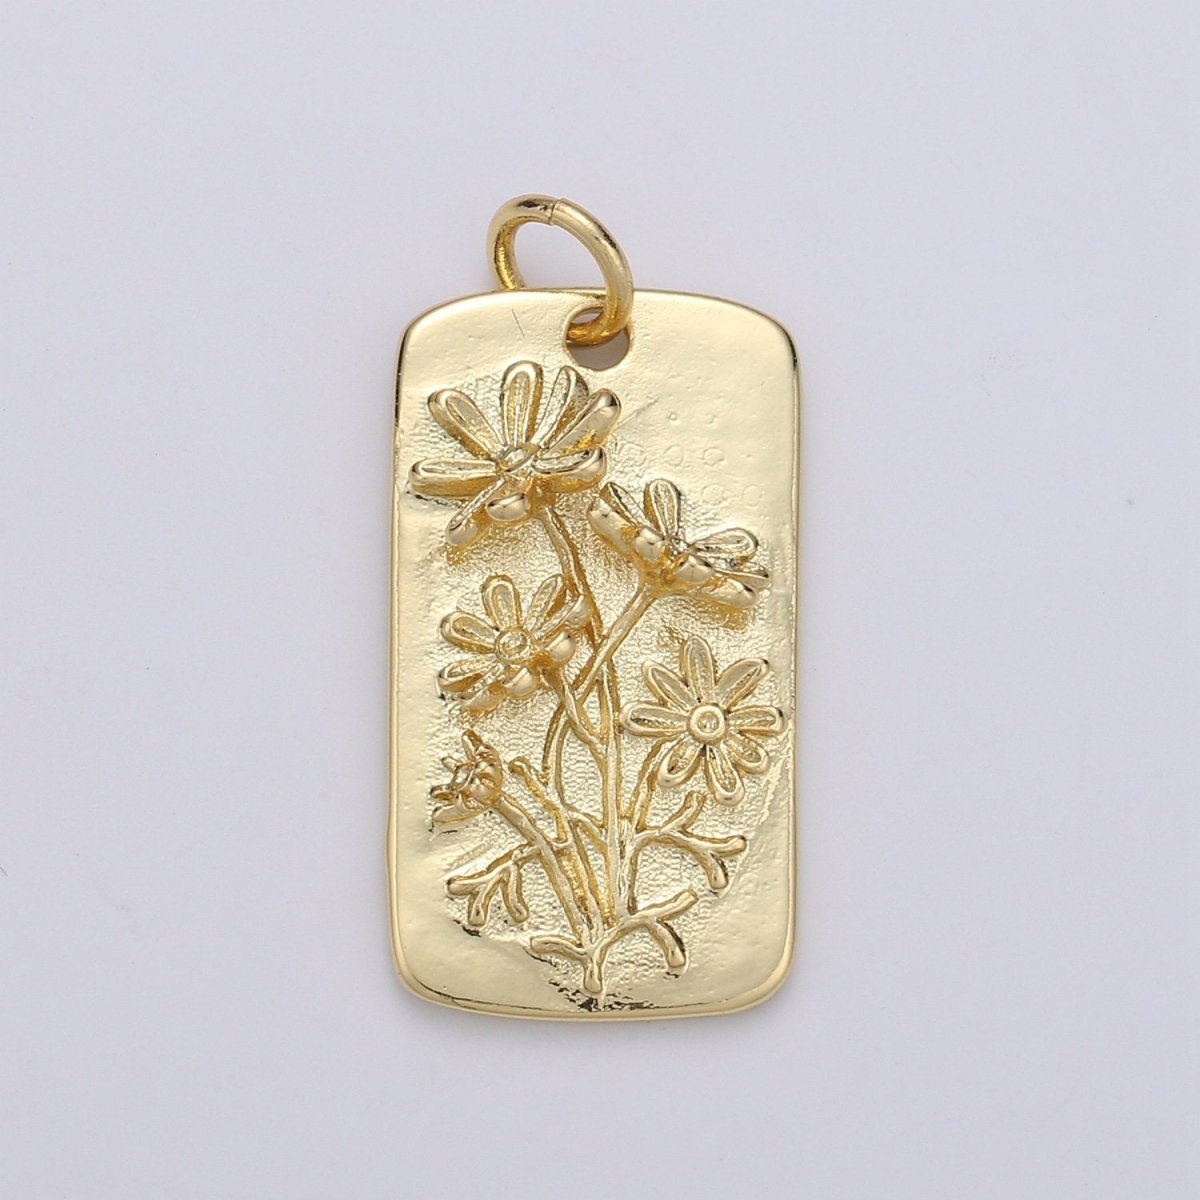 Daisy Flower Charms, Gold Daisy Pendant, Dainty Daisy Charm, Small Wild Flower Charm for Necklace Floral Flower Tag Jewelry D-770 - DLUXCA